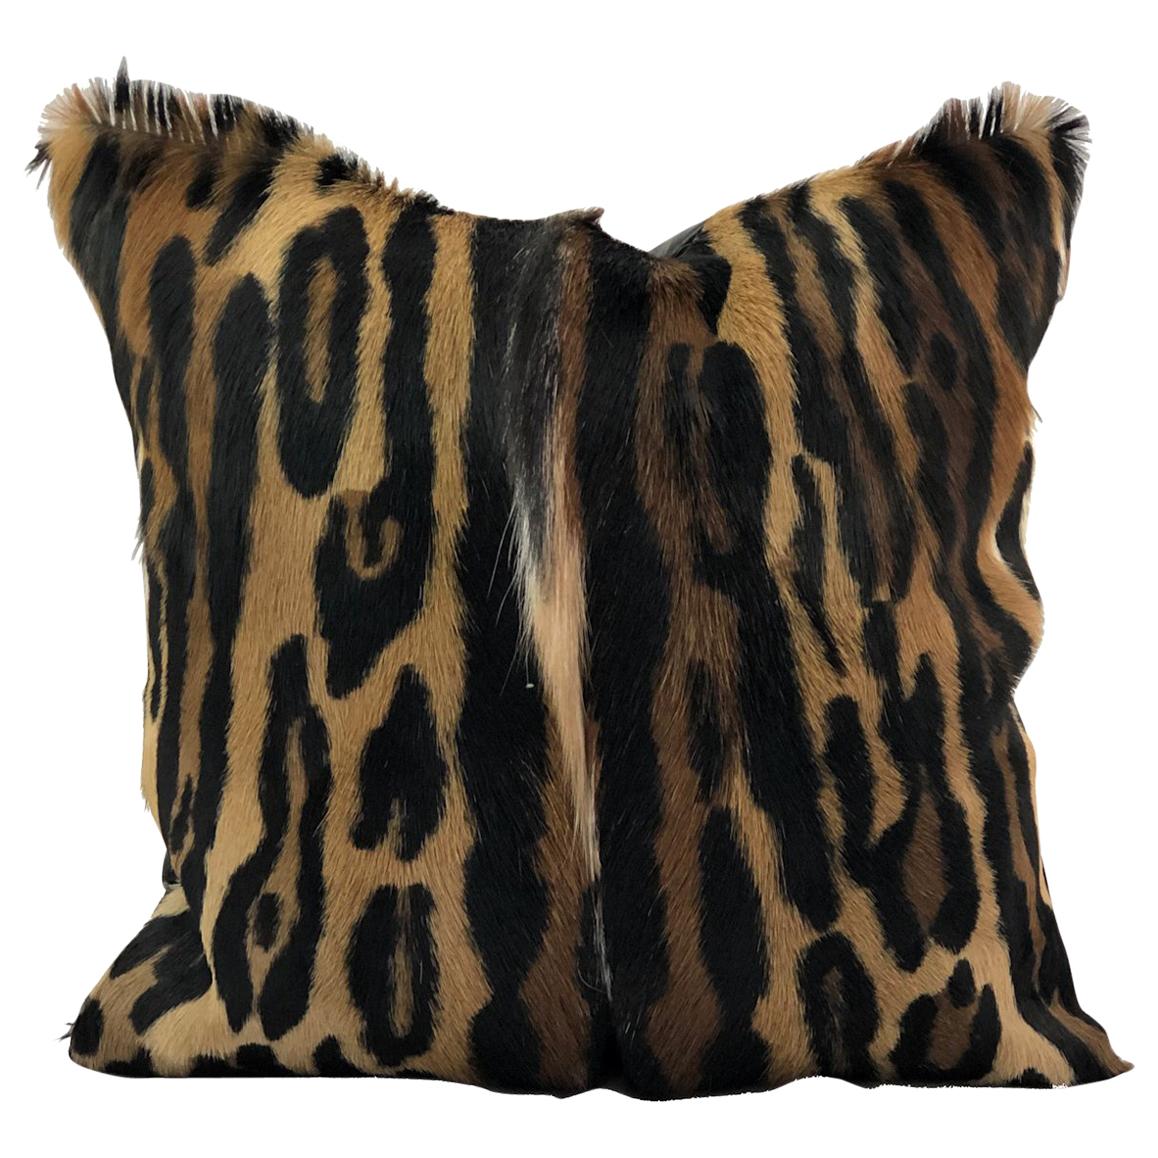 It's the season of wild and exotic leopard prints, so set your interiors free with this glamorous leopard fur pillow. A beautifully designed print, screen printed over an African Springbok skin captures the natural undertones found in each